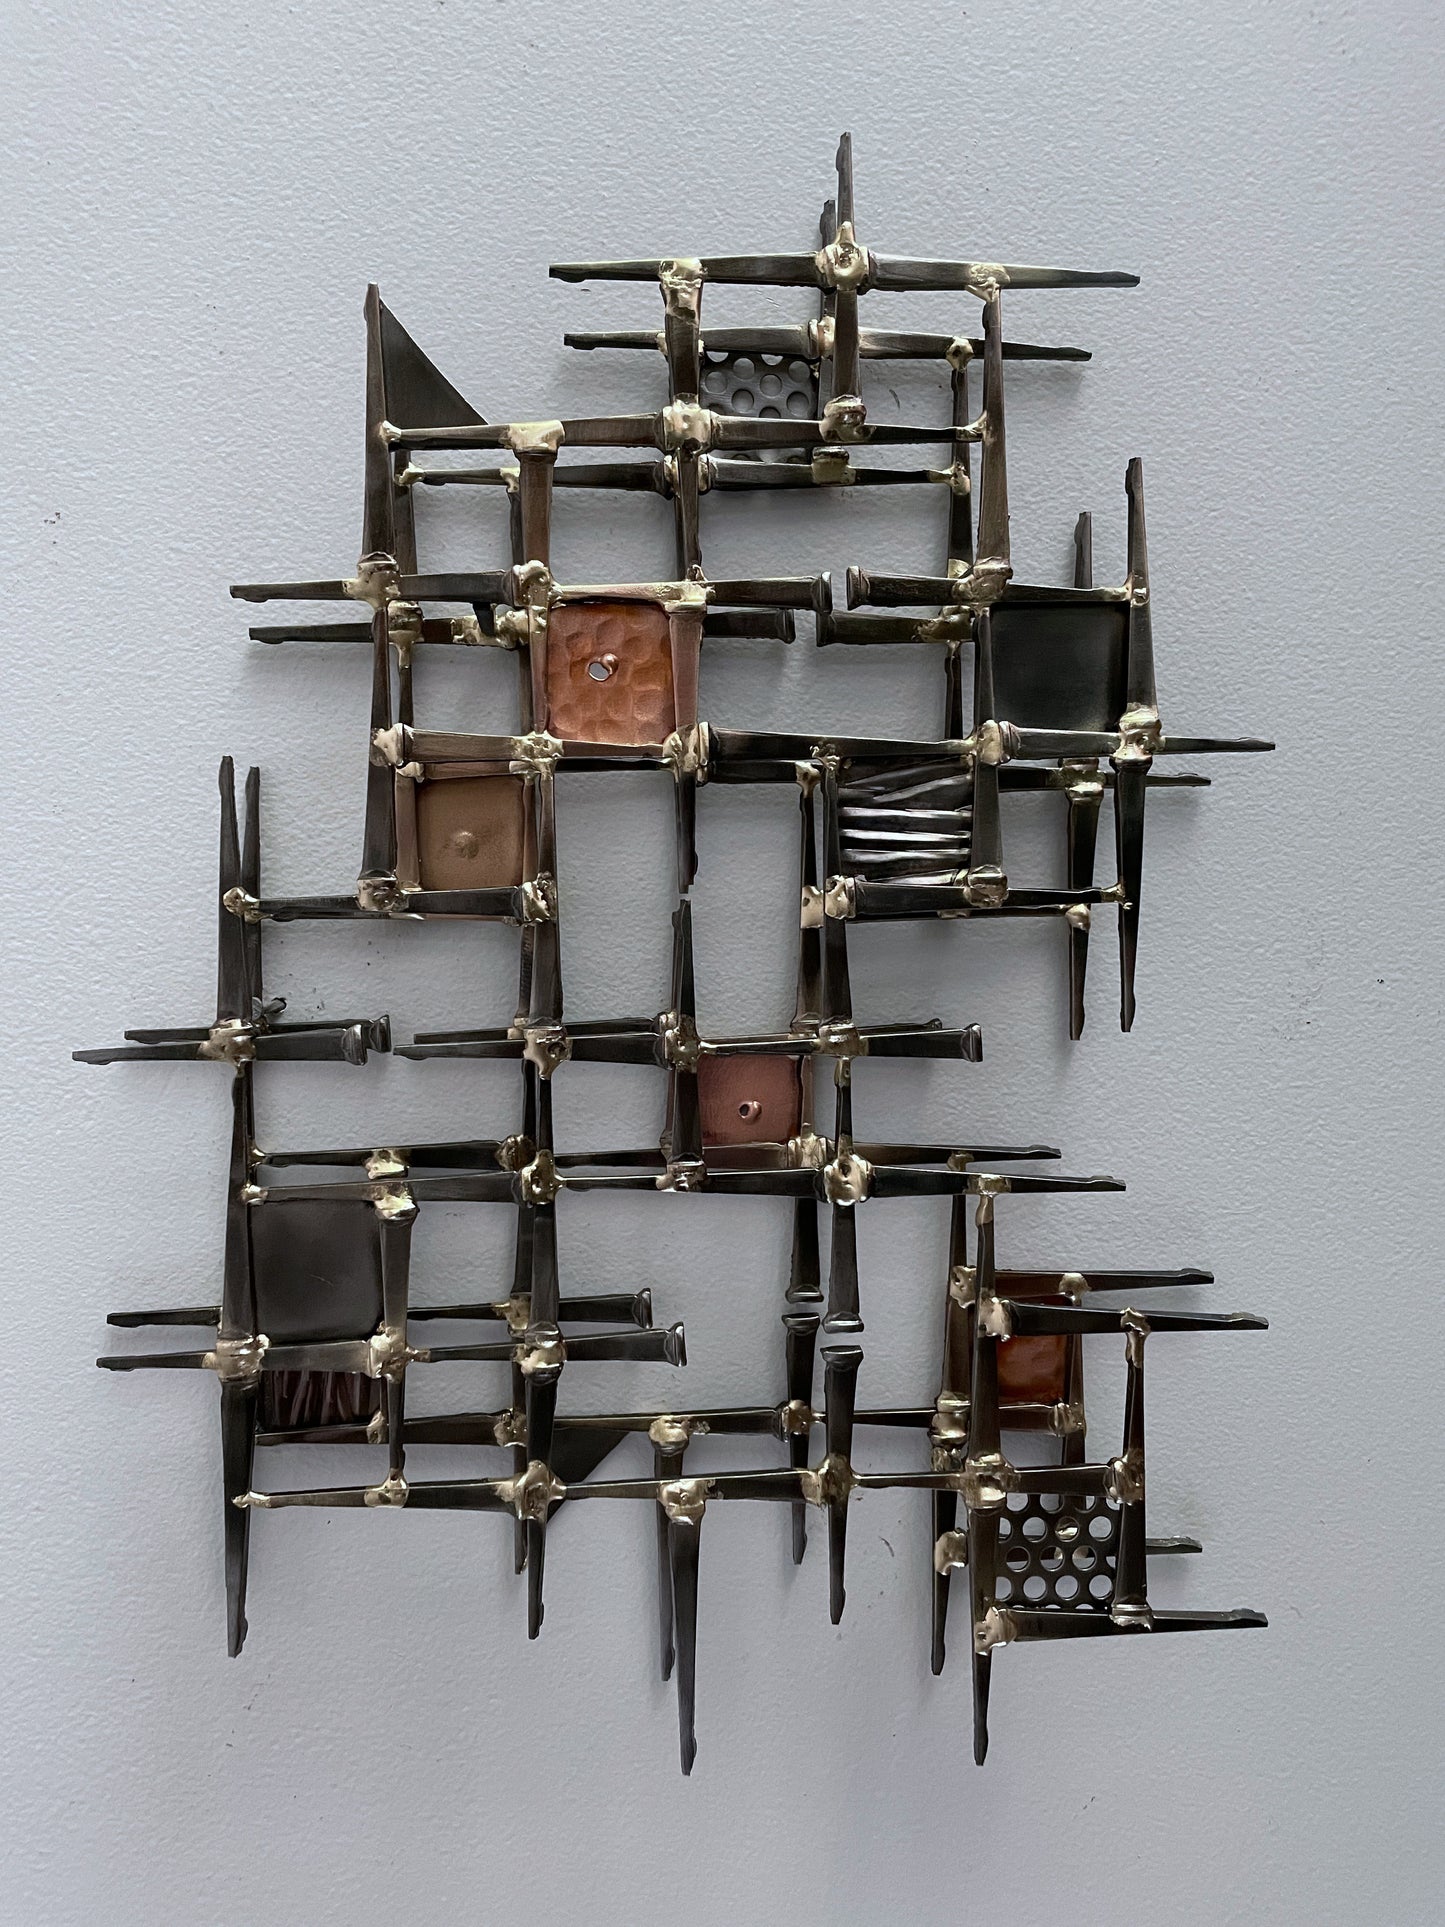 Better Together - Brutalist Mid-Century style Metal Wall Sculpture